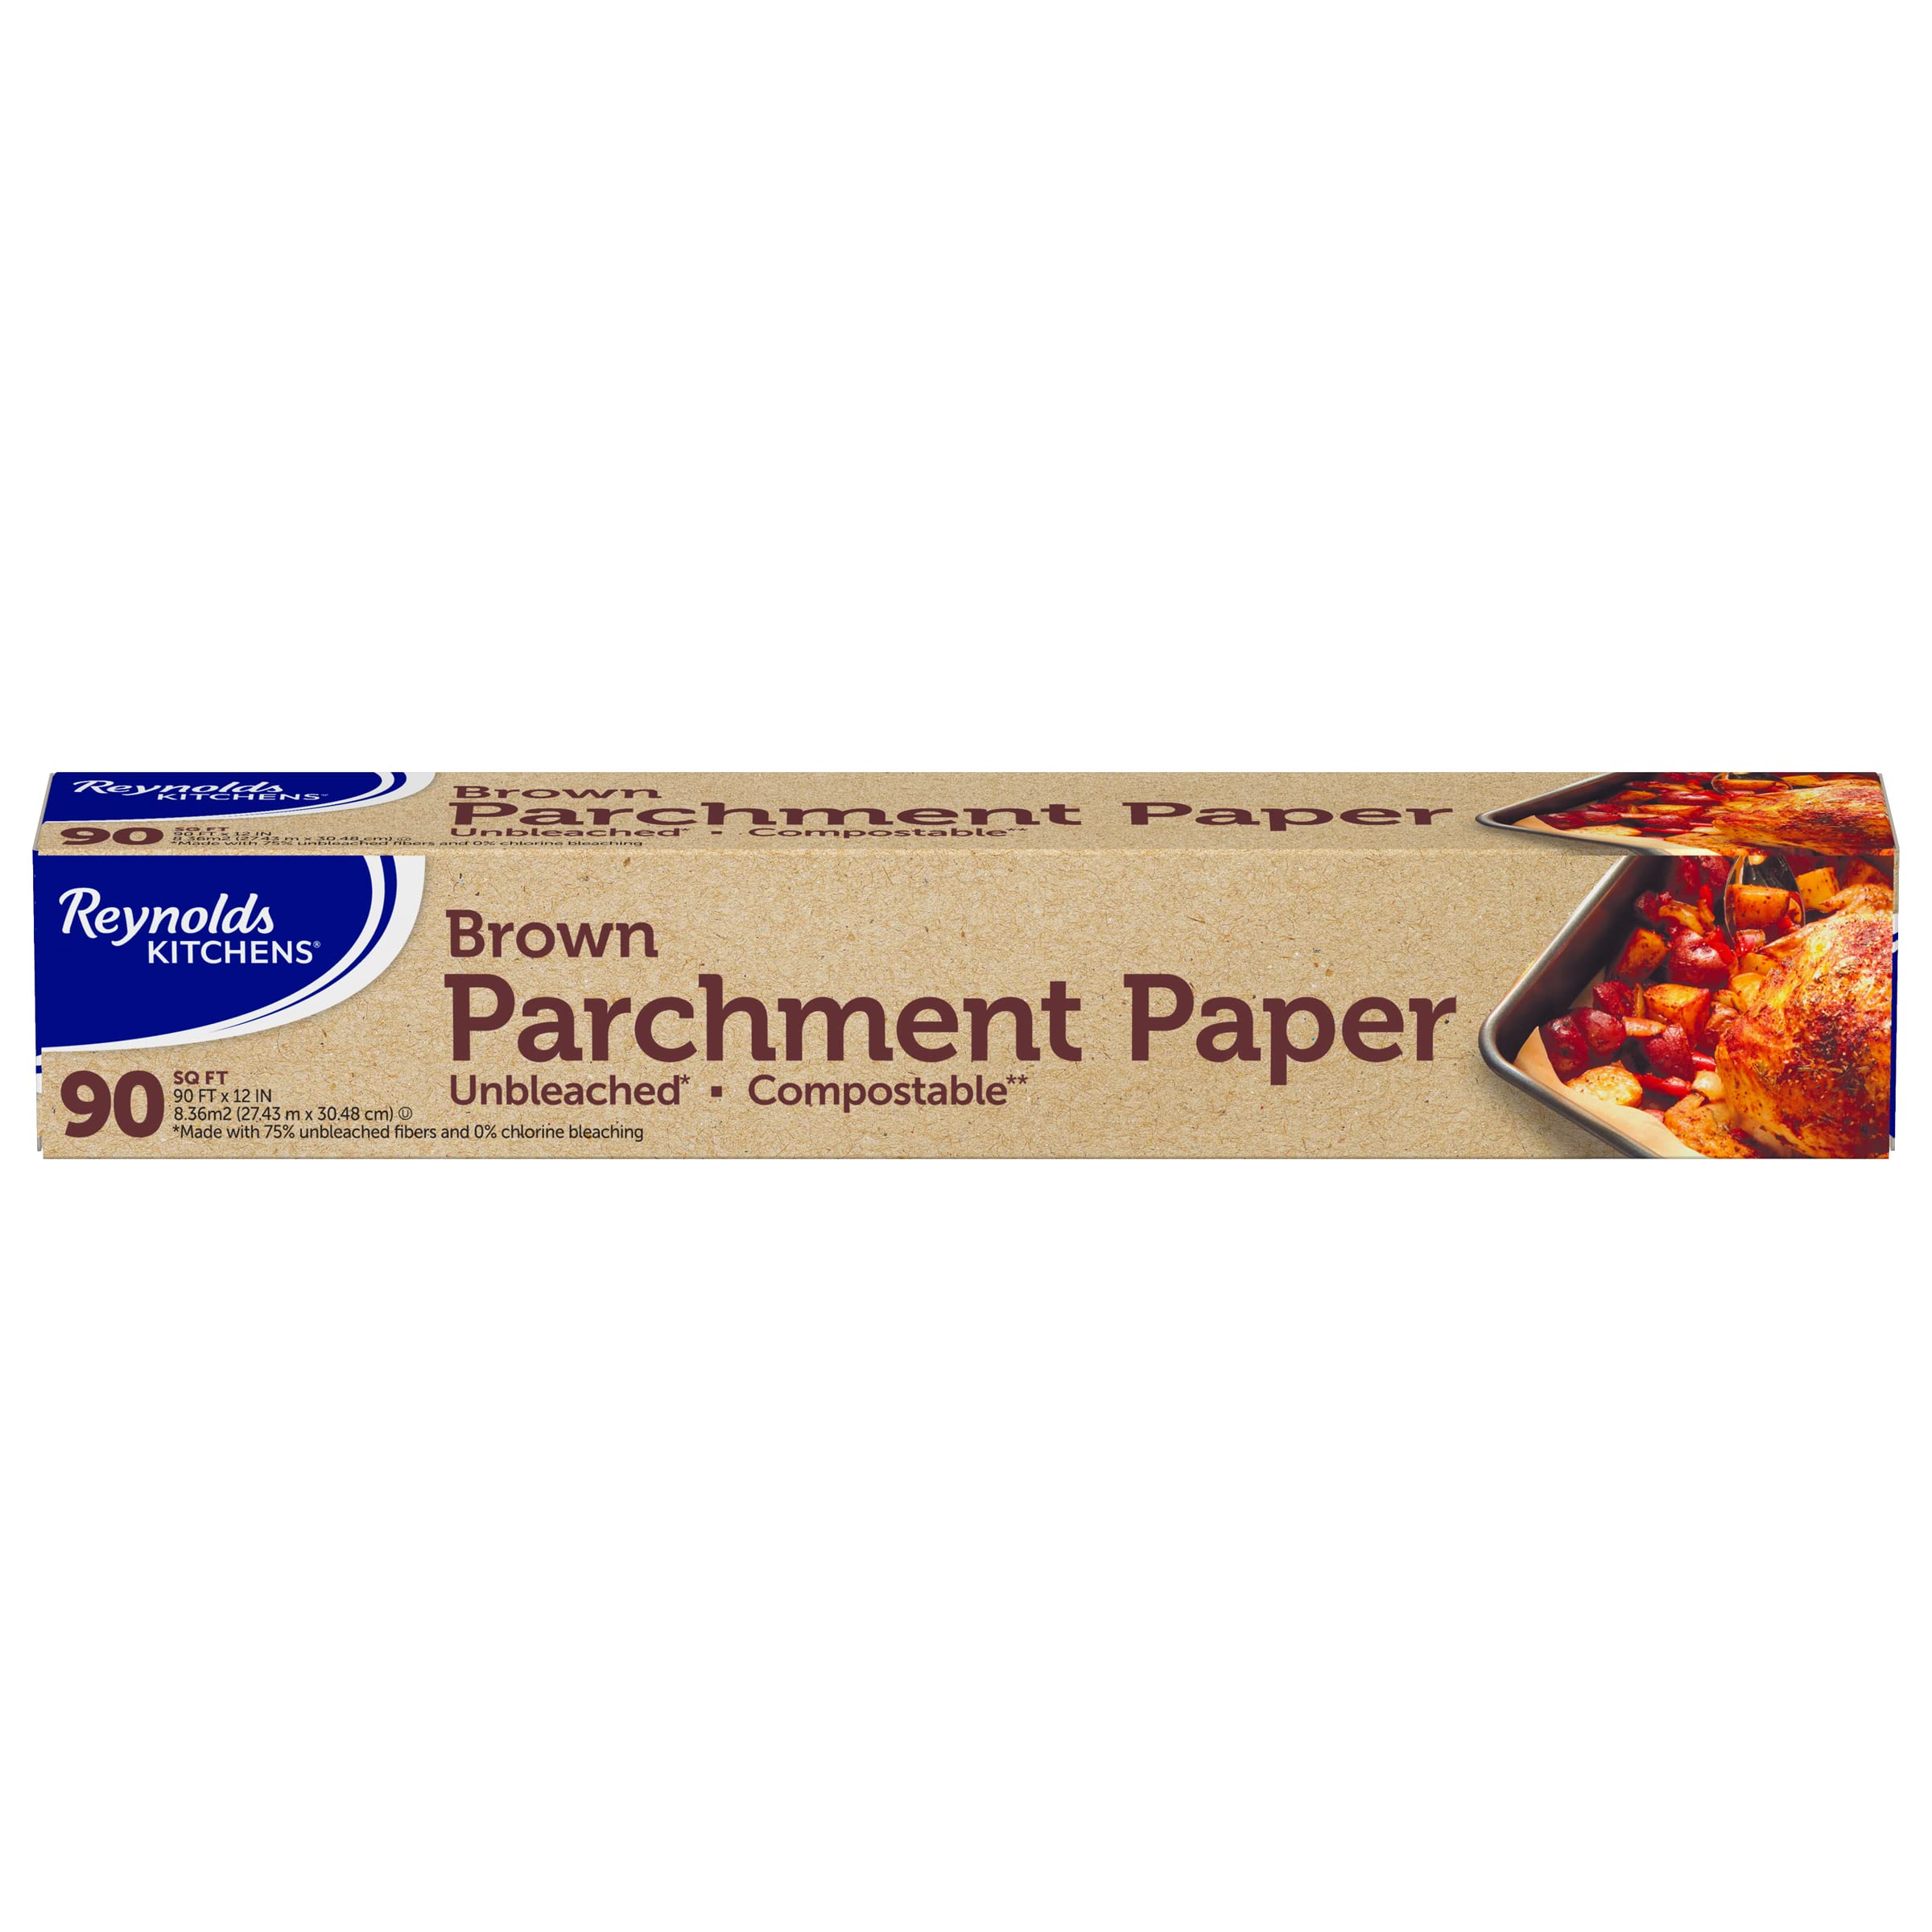 Reynolds Kitchens Brown Parchment Paper Roll, 90 Square Feet